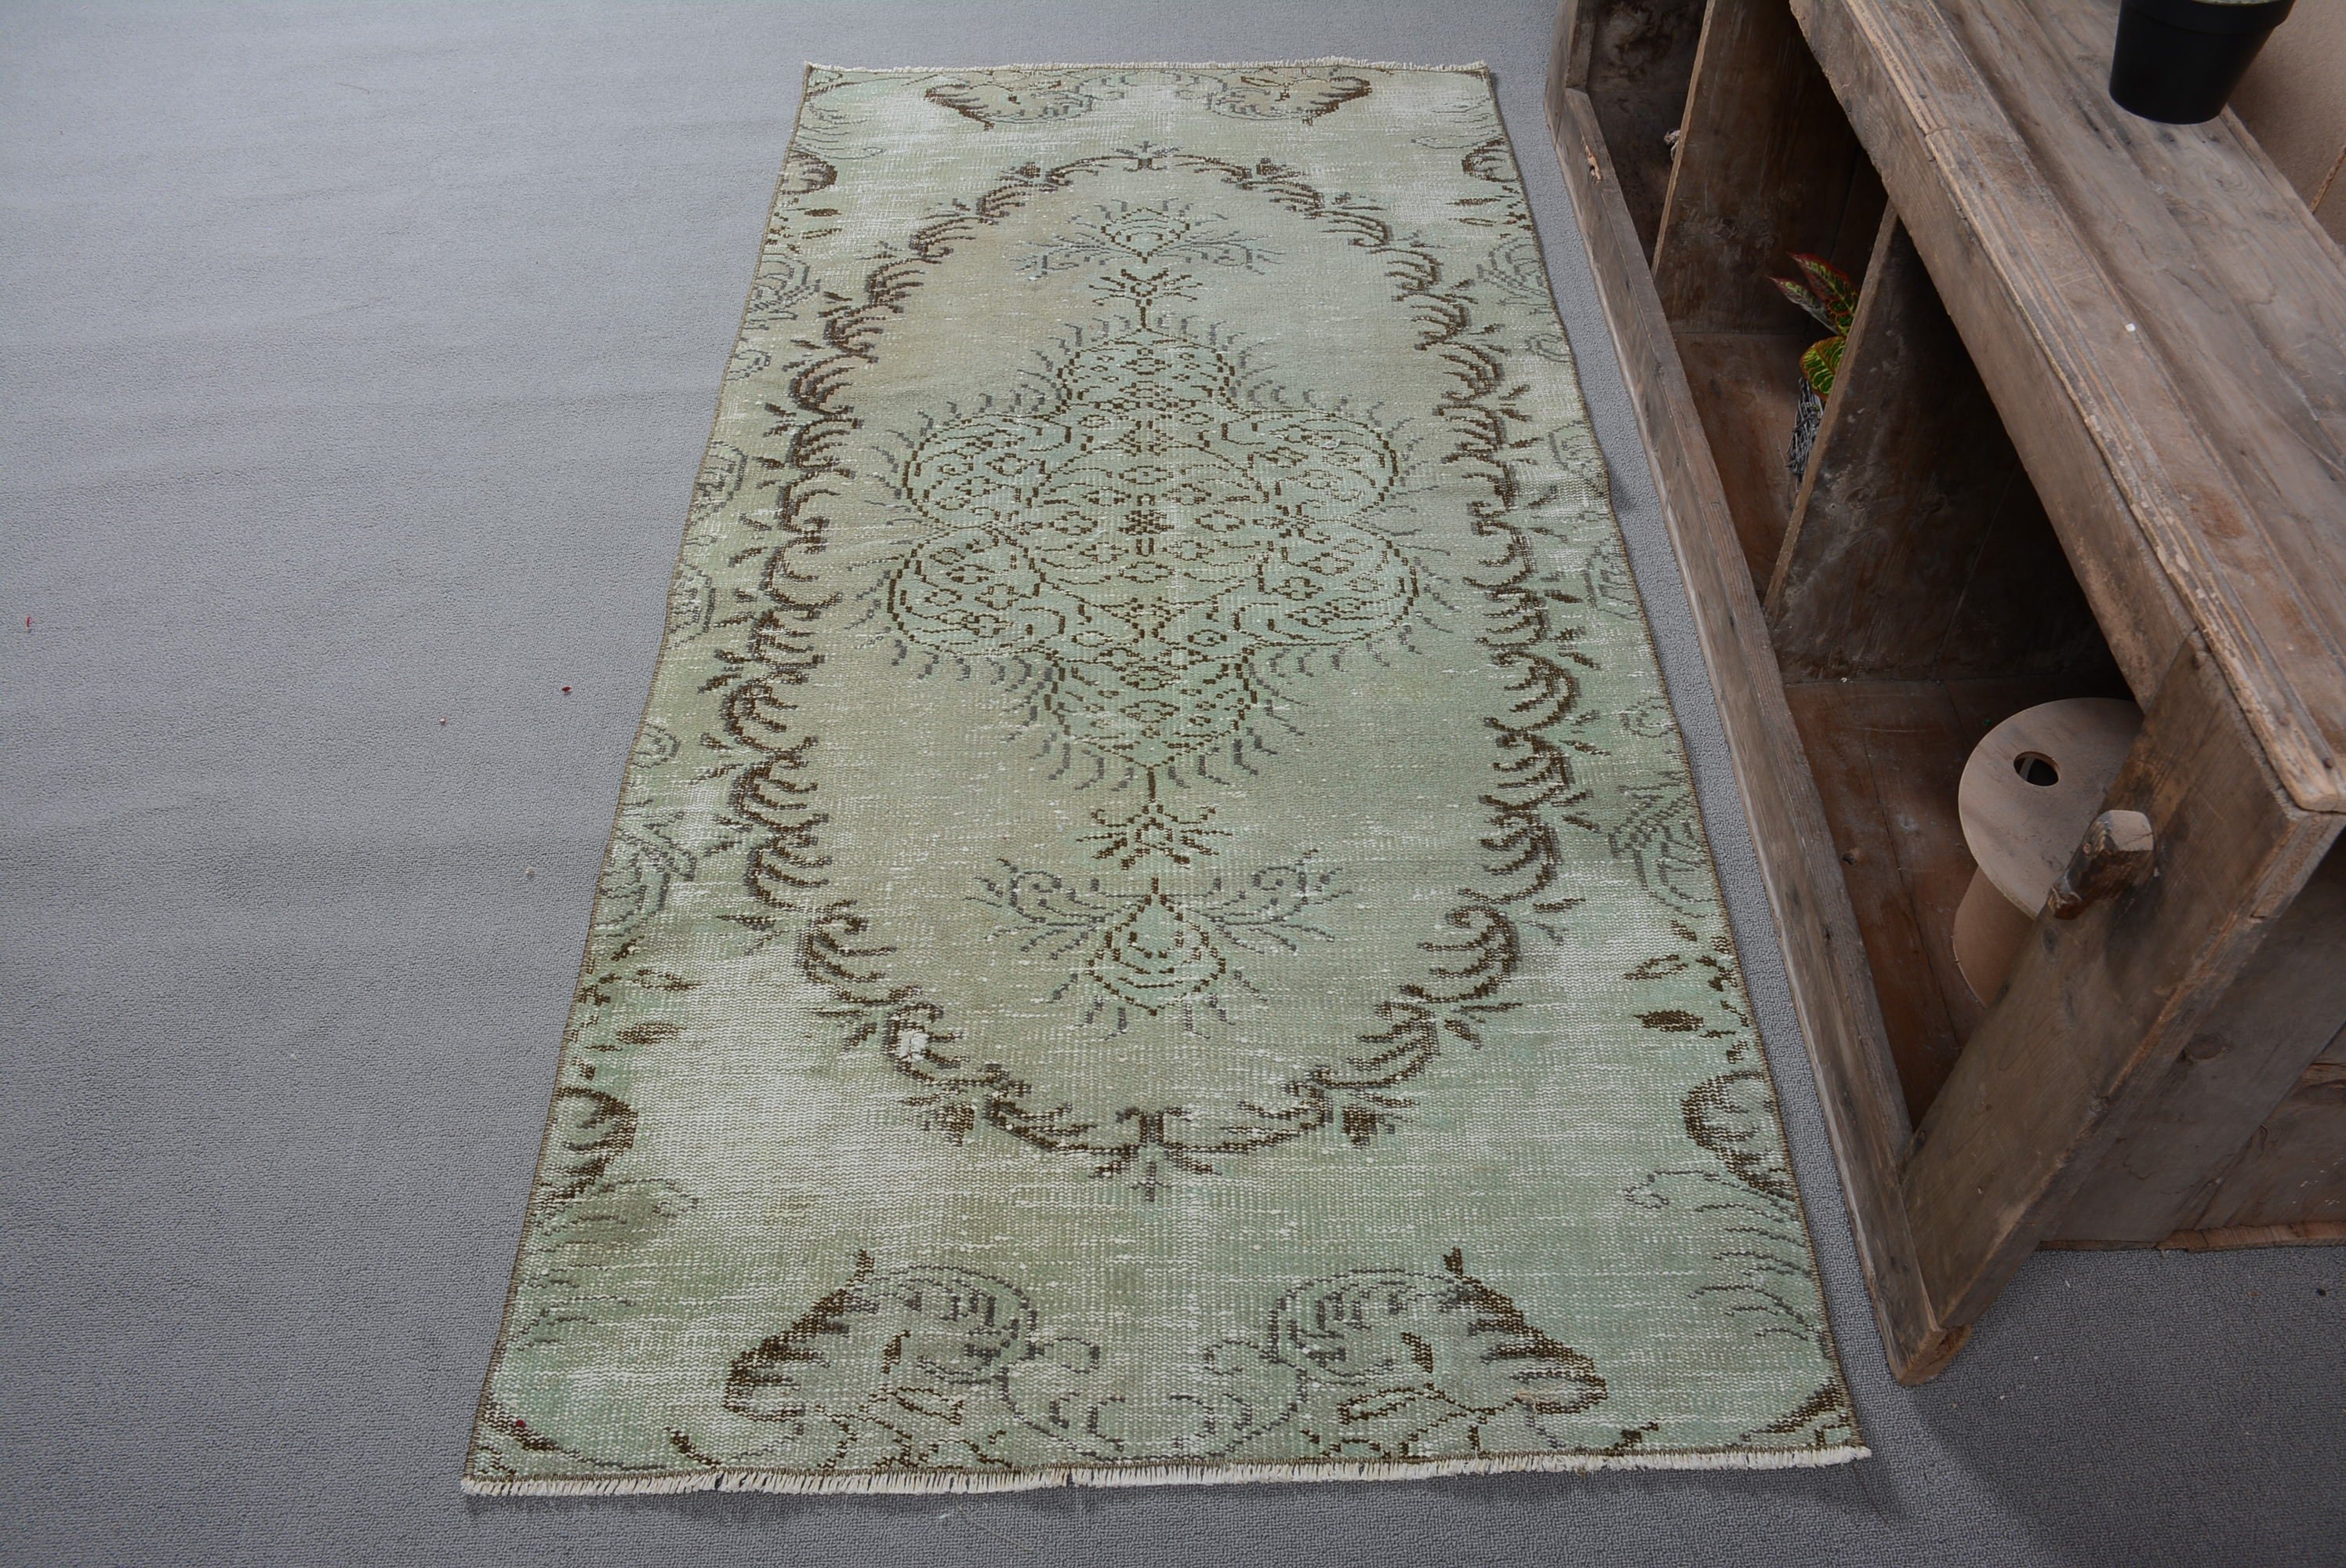 Rugs for Entry, Cool Rug, Turkish Rugs, Oushak Rug, Kitchen Rugs, Green Anatolian Rug, 3.2x6.4 ft Accent Rugs, Vintage Rugs, Nursery Rugs